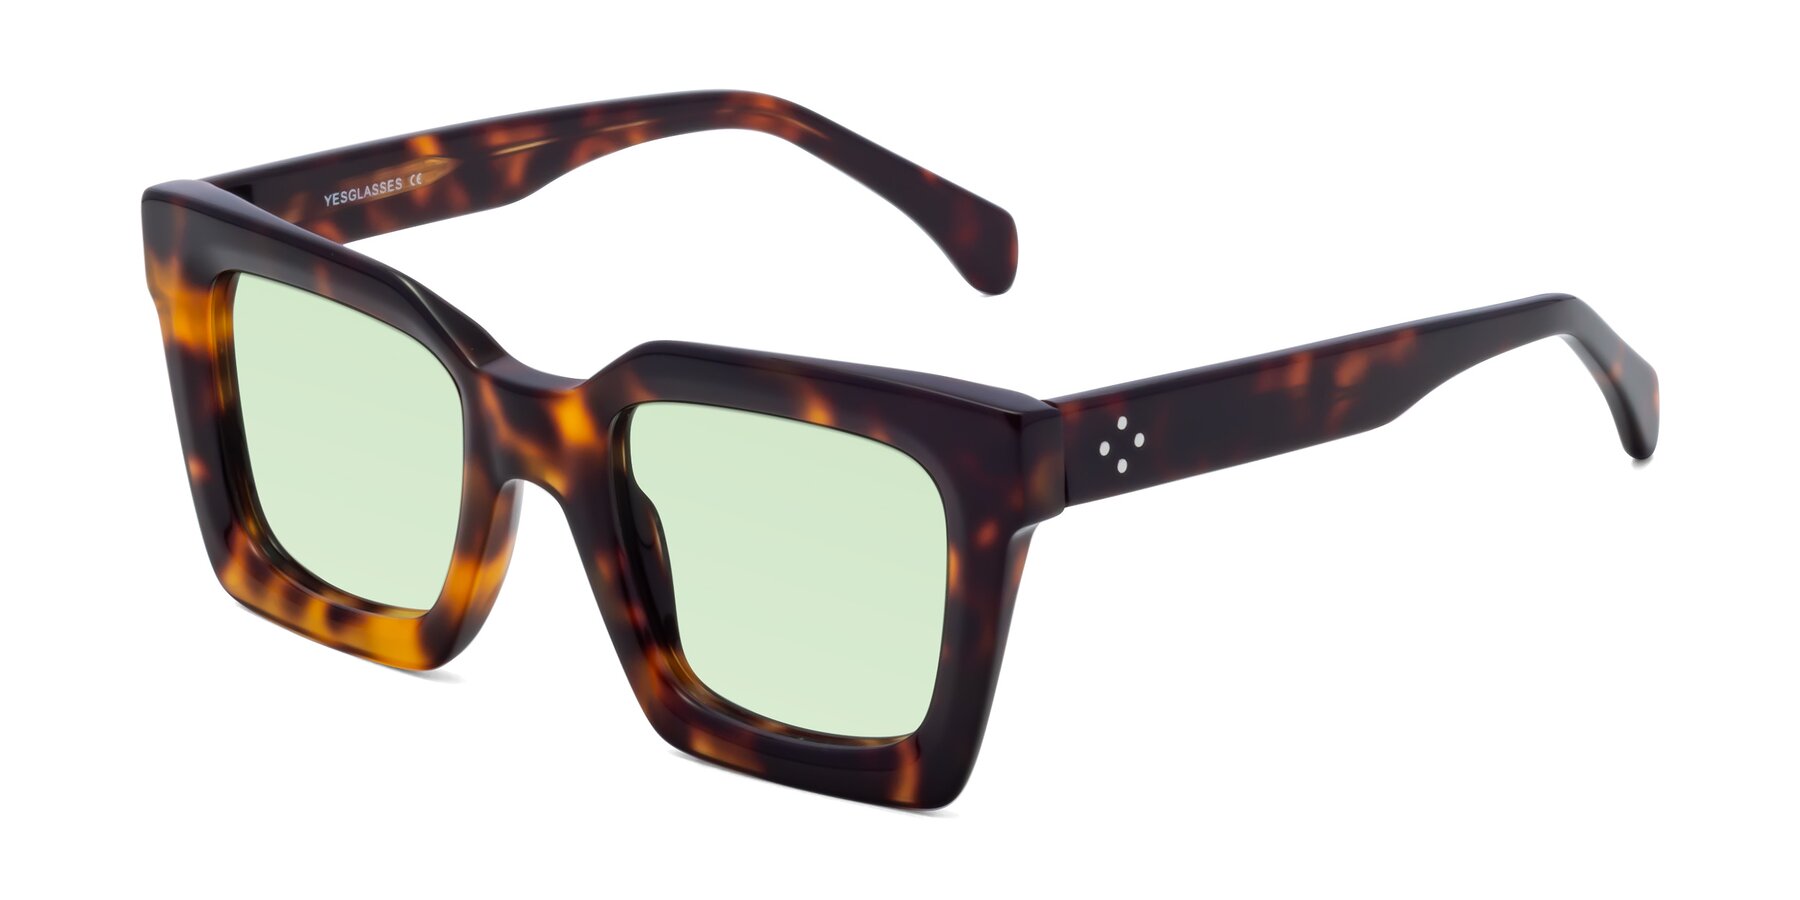 Angle of Piper in Tortoise with Light Green Tinted Lenses